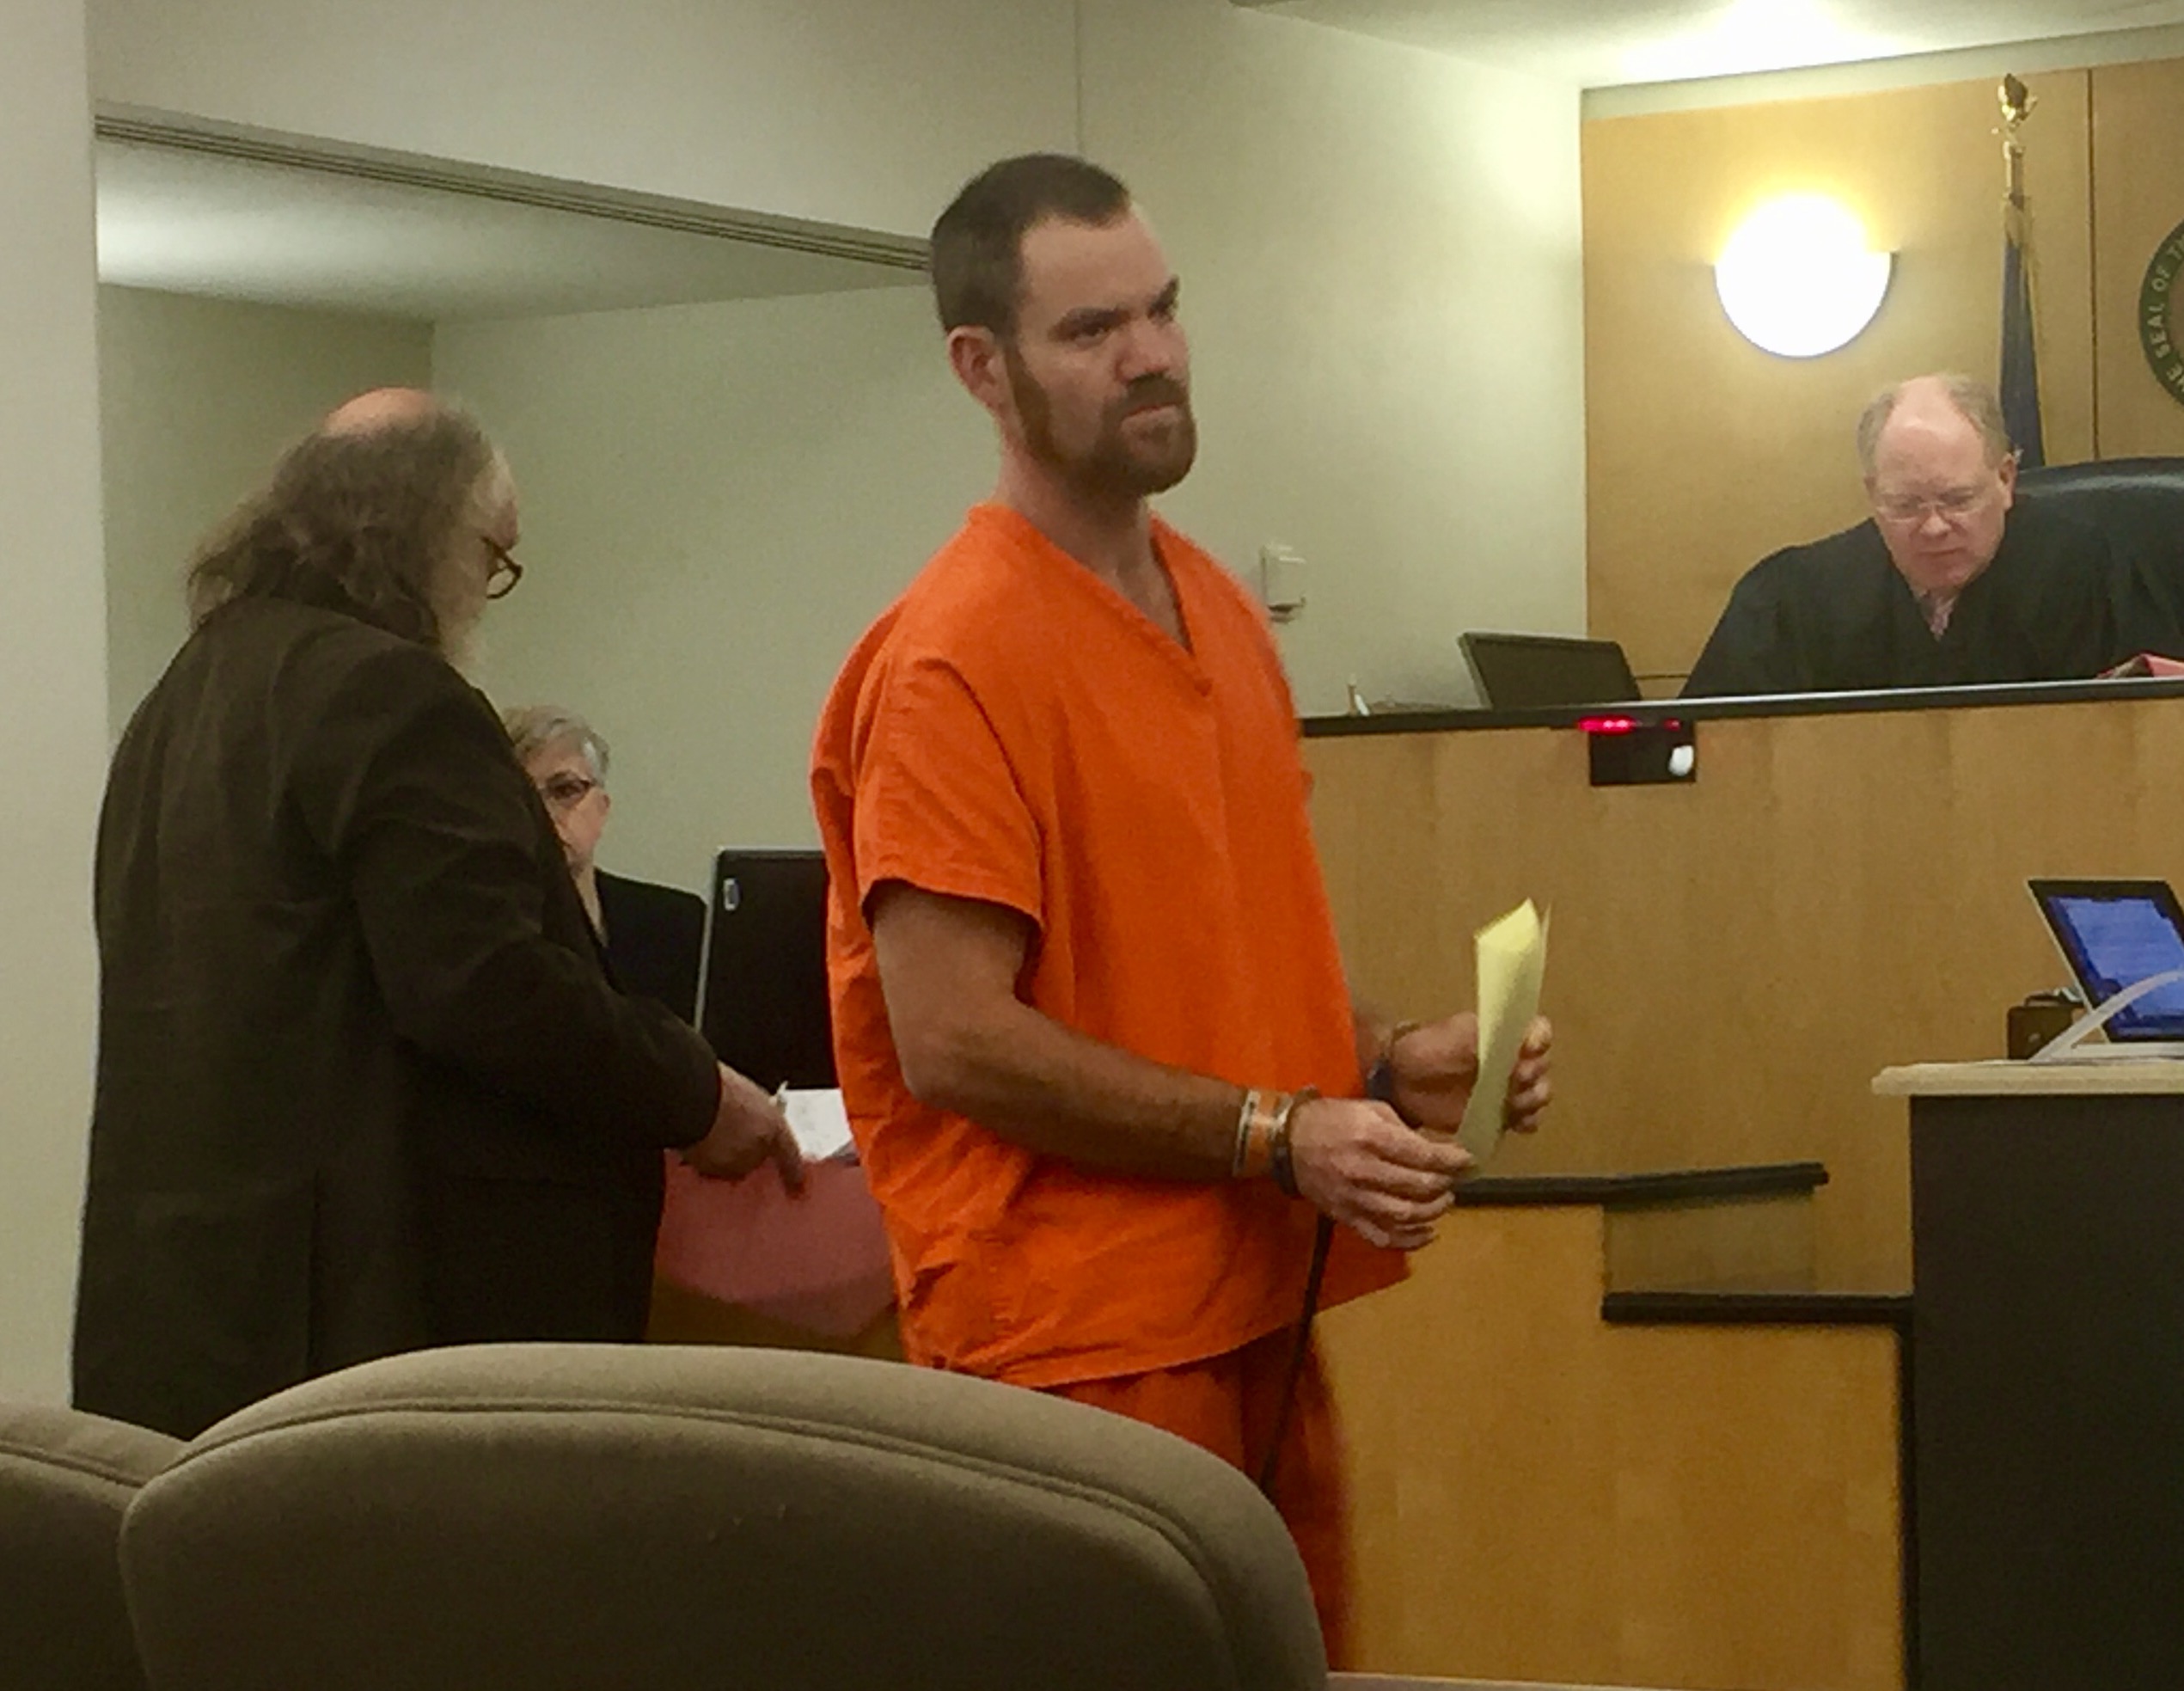 Shaun Michael Sprague enters not-guilty pleas Wednesday in Clark County Superior Court in connection with a shooting at the Hazel Dell Wal-Mart and arson in October.